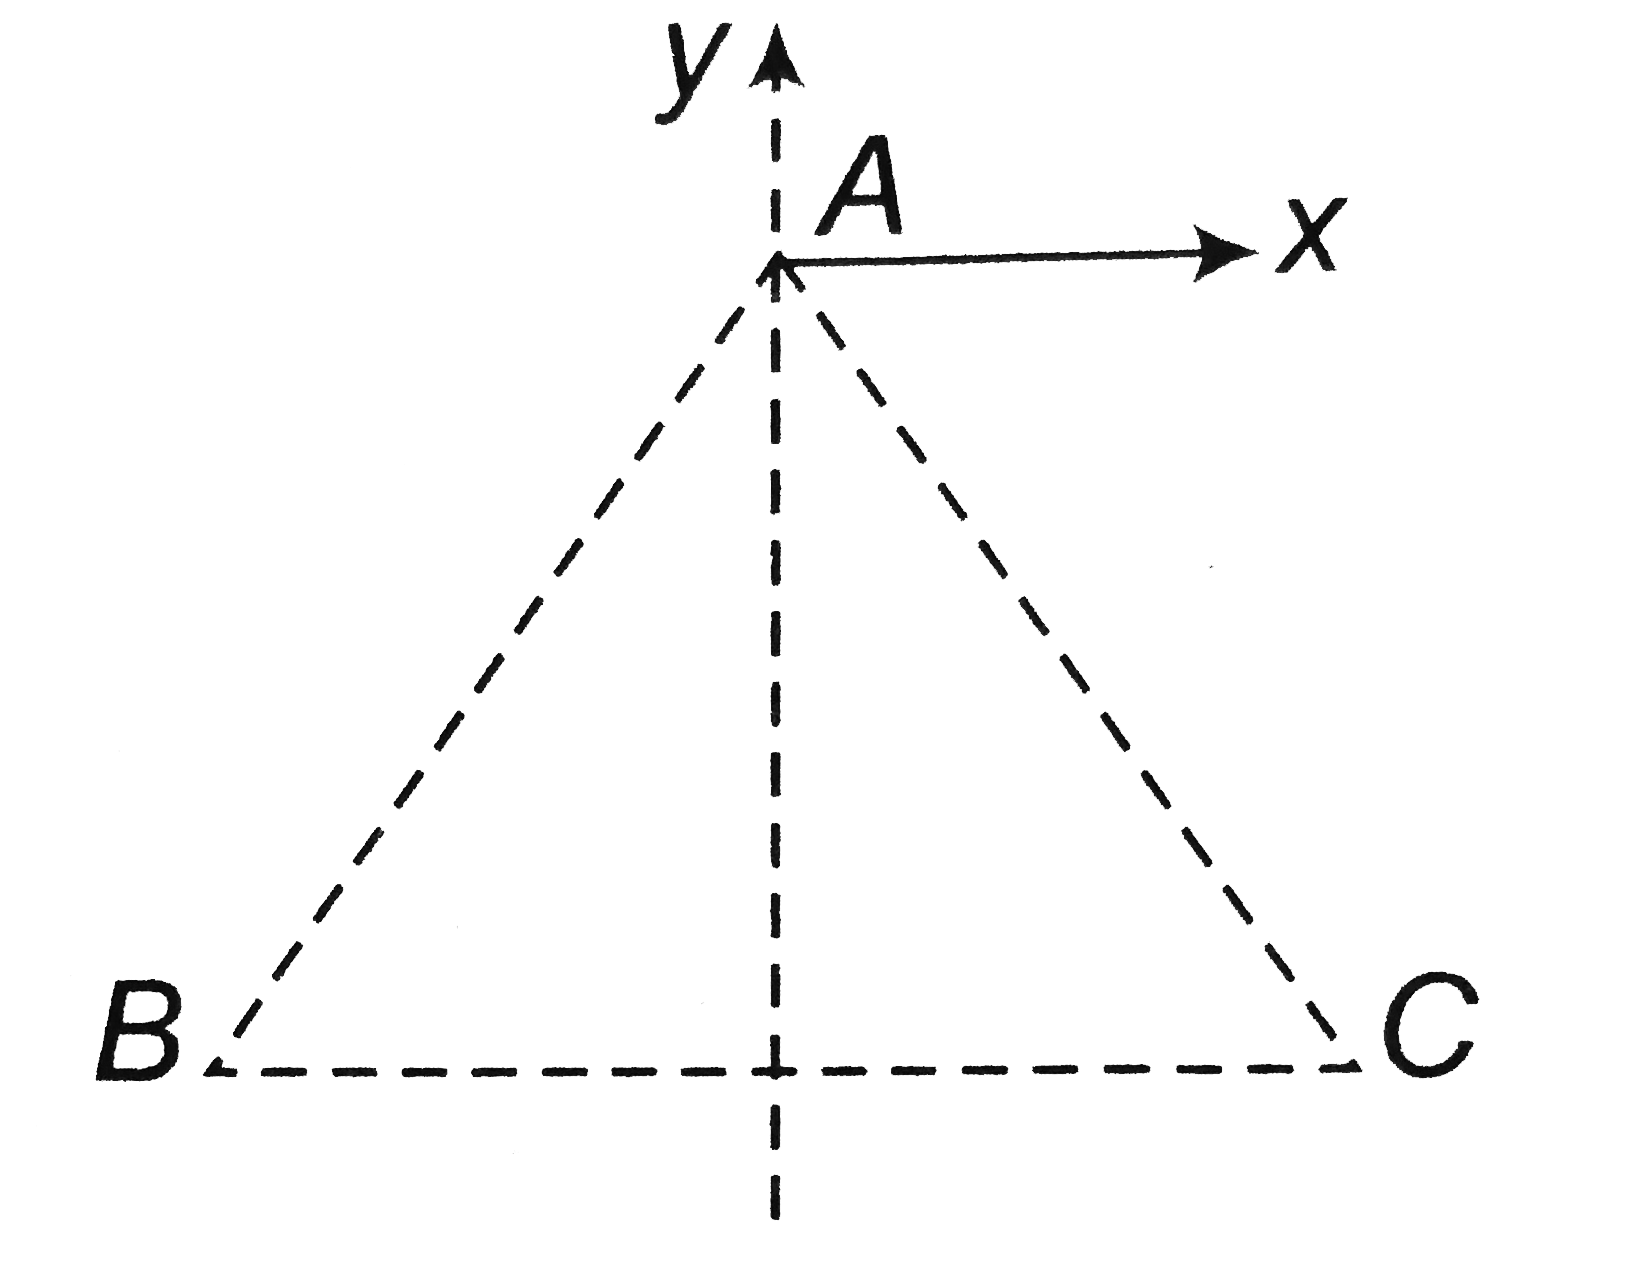 Three similar charges +q are placed on 3 corners of an equilateral triangle ABC of side a. How many minimum charges should be placed on a circle of radius a with centre at A so that resultant force on the charge placed at the centre is (q^(2))/(4pi epsilon(0)a^(2)) along x-axis?